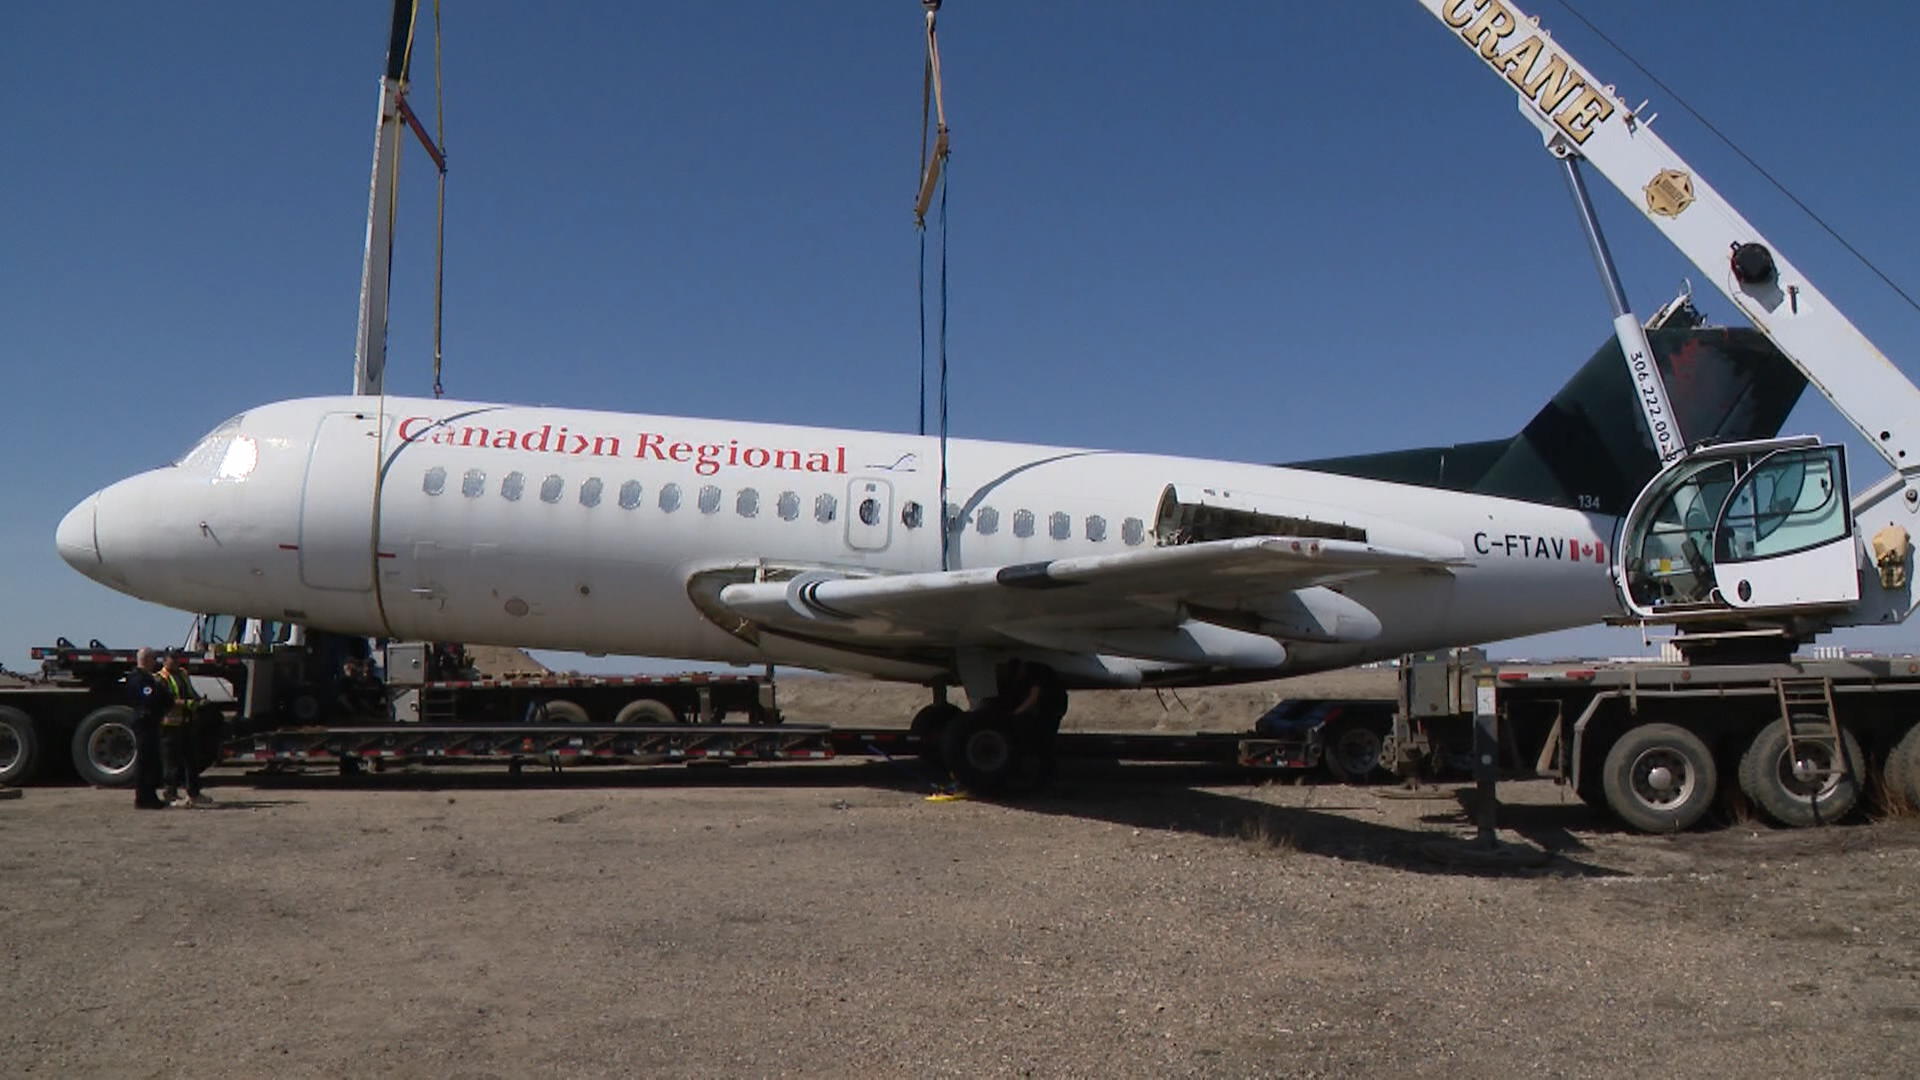 A big piece of Saskatoon airline history departing for Lethbridge